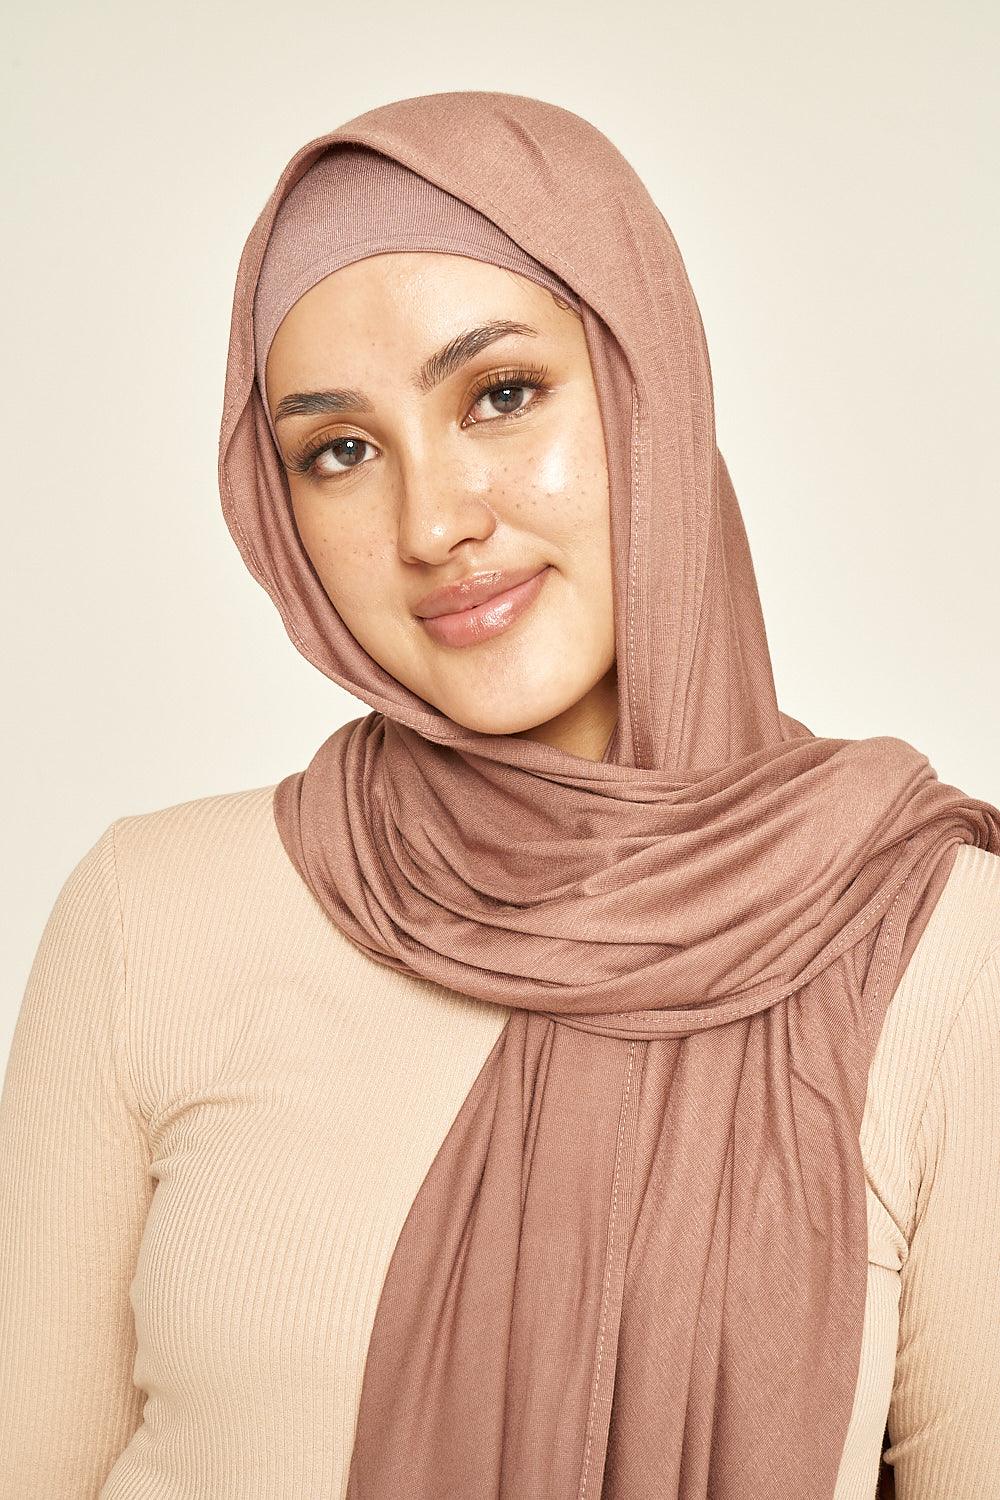 SABA scarves Ribbed Jersey Hijab Bali Collection [Wrinkle free effortless  daily essentials] (Beige), (SABA-RJ8000) at  Women's Clothing store